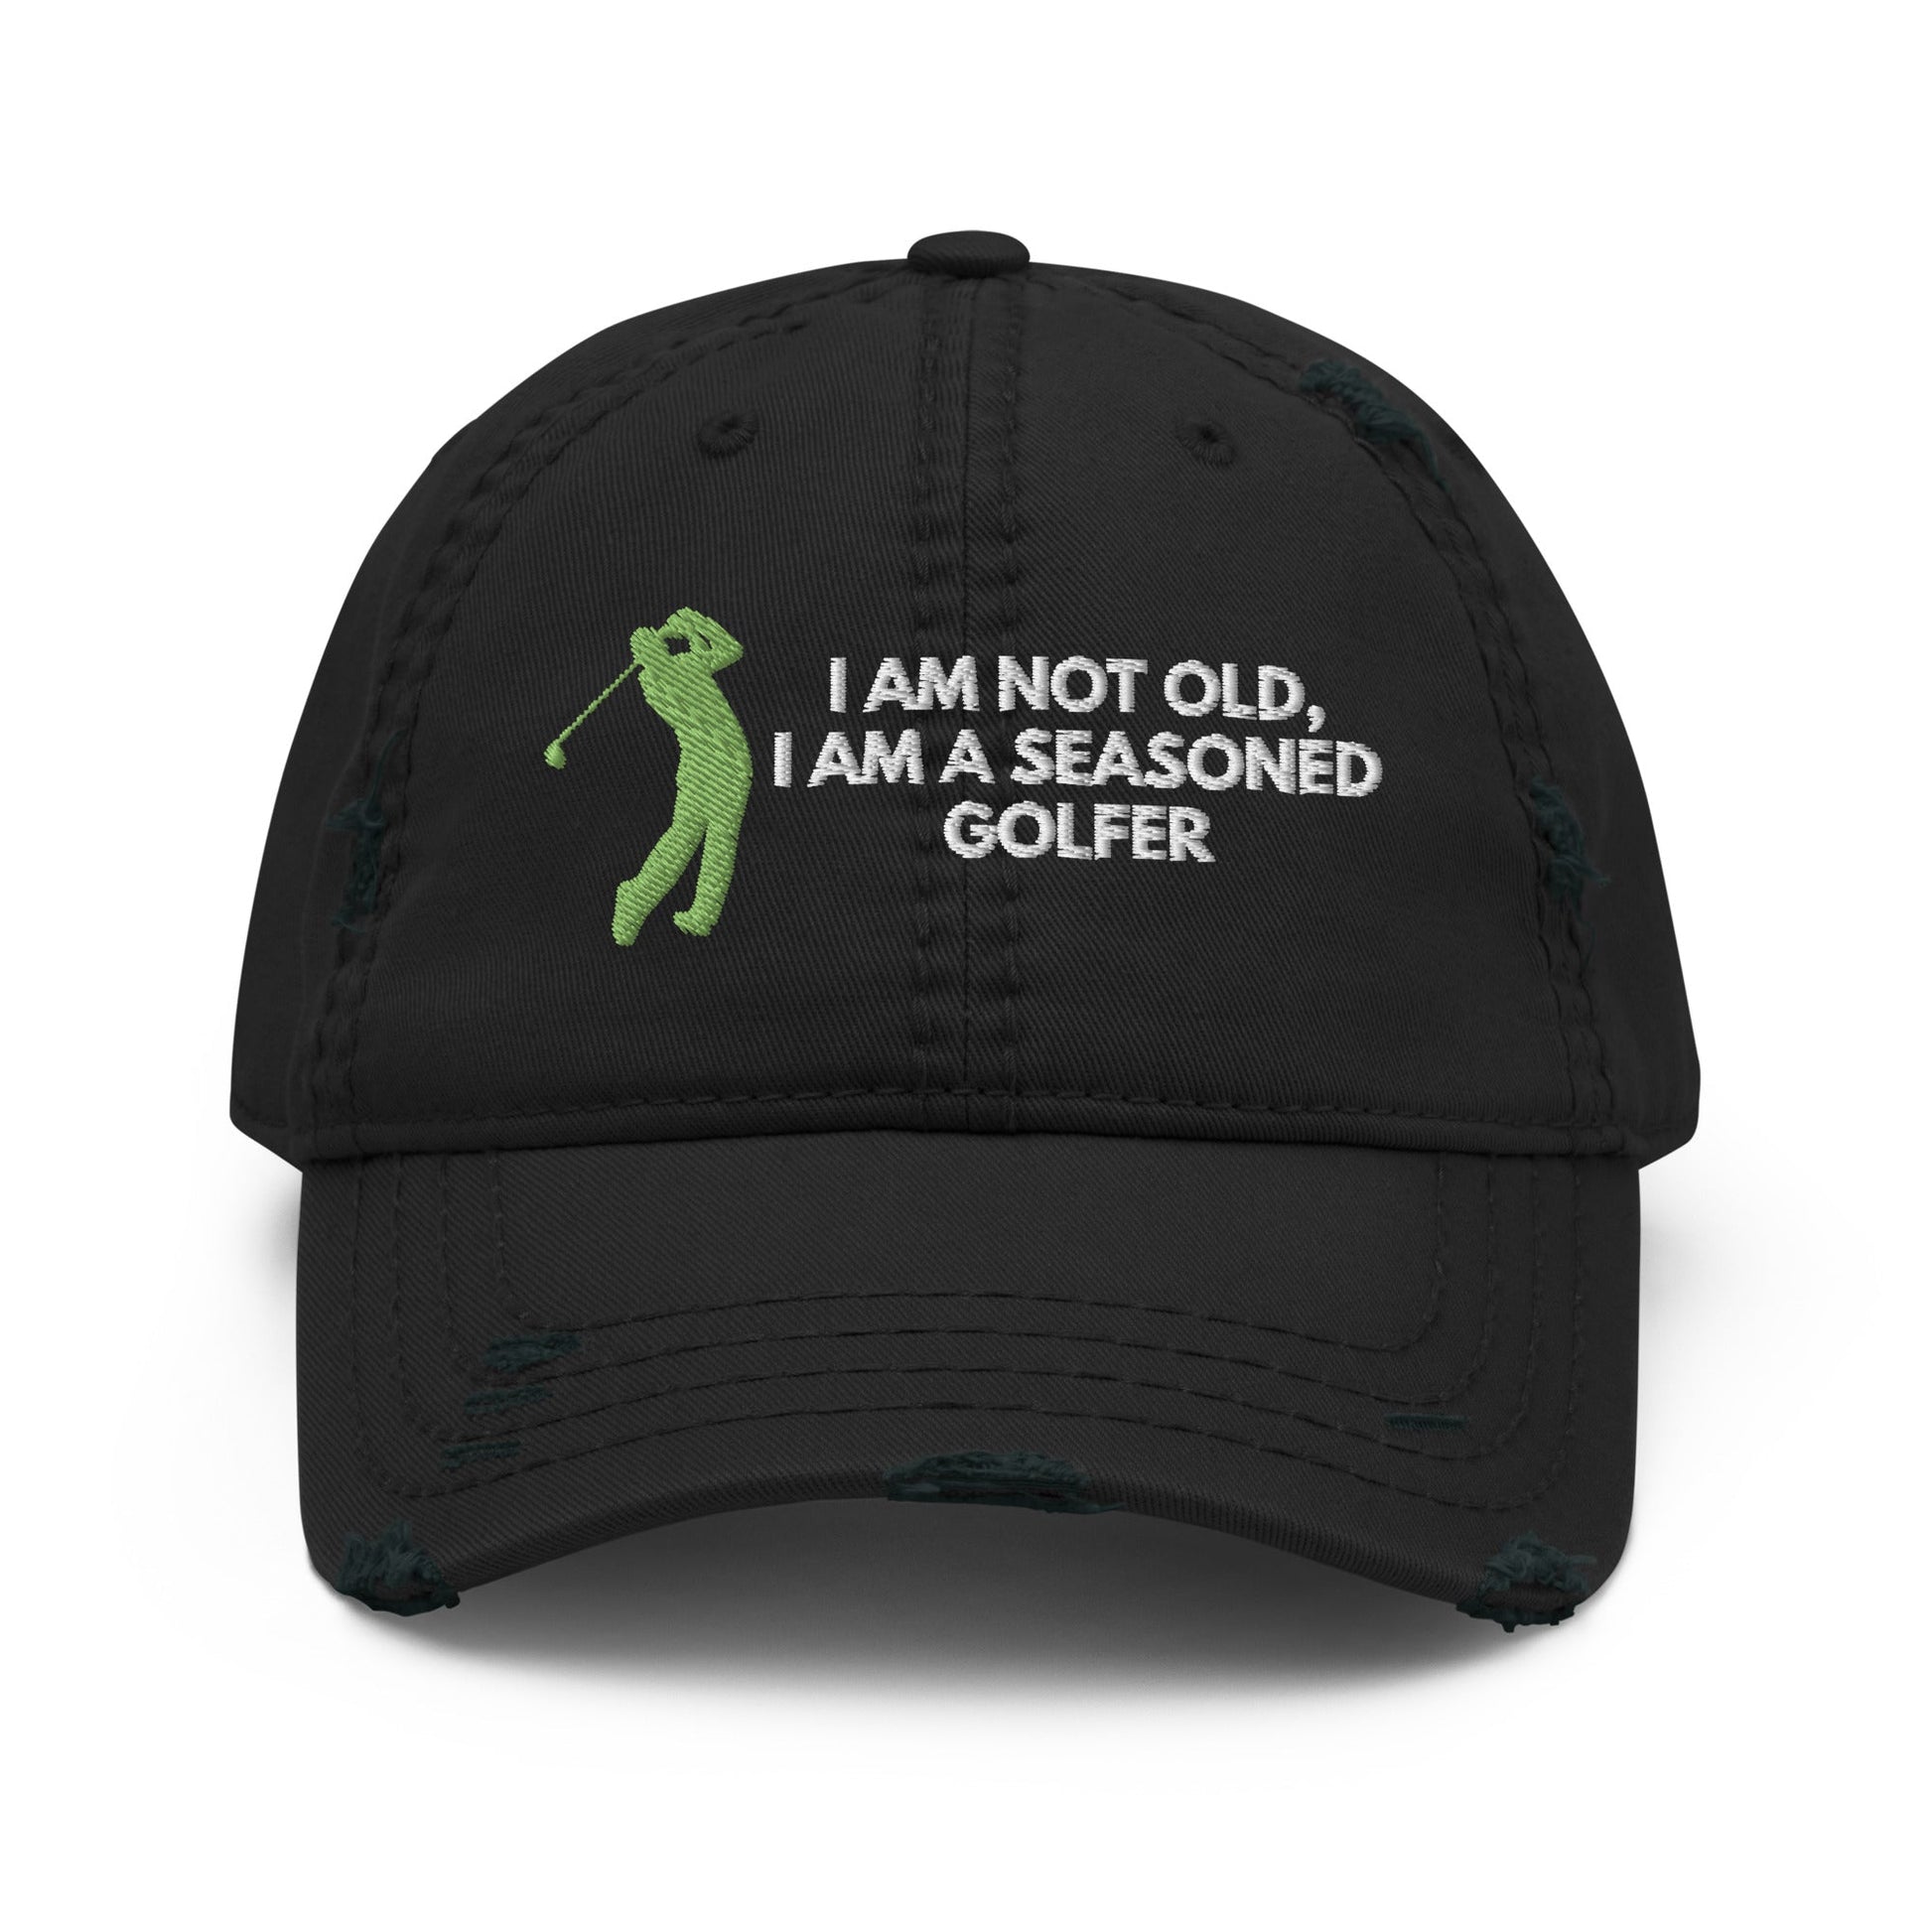 Funny Golfer Gifts  Distressed Cap Black Im Not Old I Am A Seasoned Golfer Hat Distressed Hat